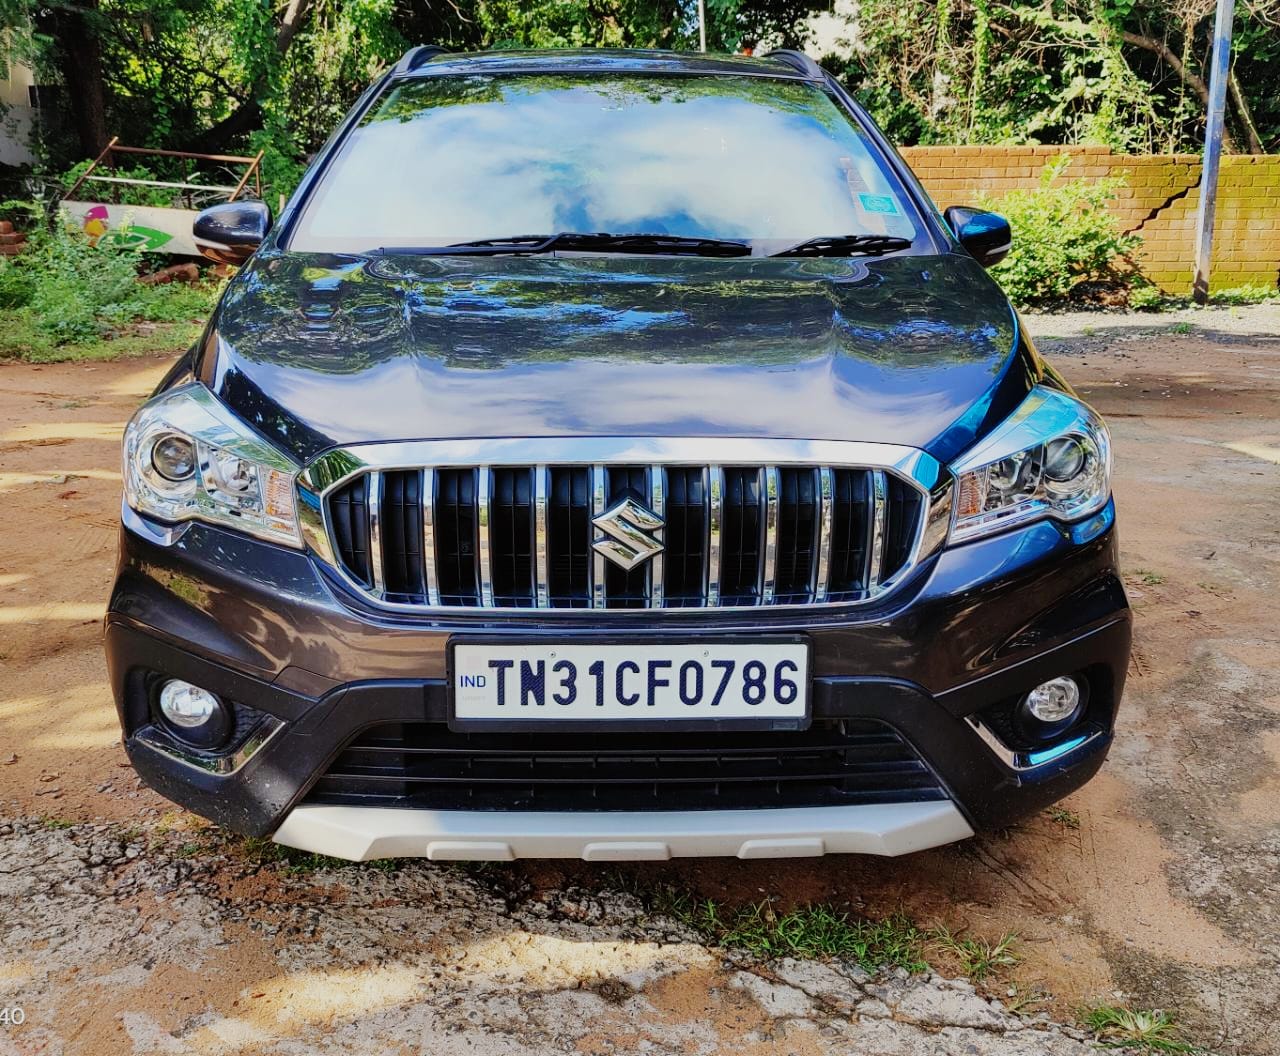 4519-for-sale-Maruthi-Suzuki-S-Cross-Petrol-First-Owner-2021-TN-registered-rs-975000